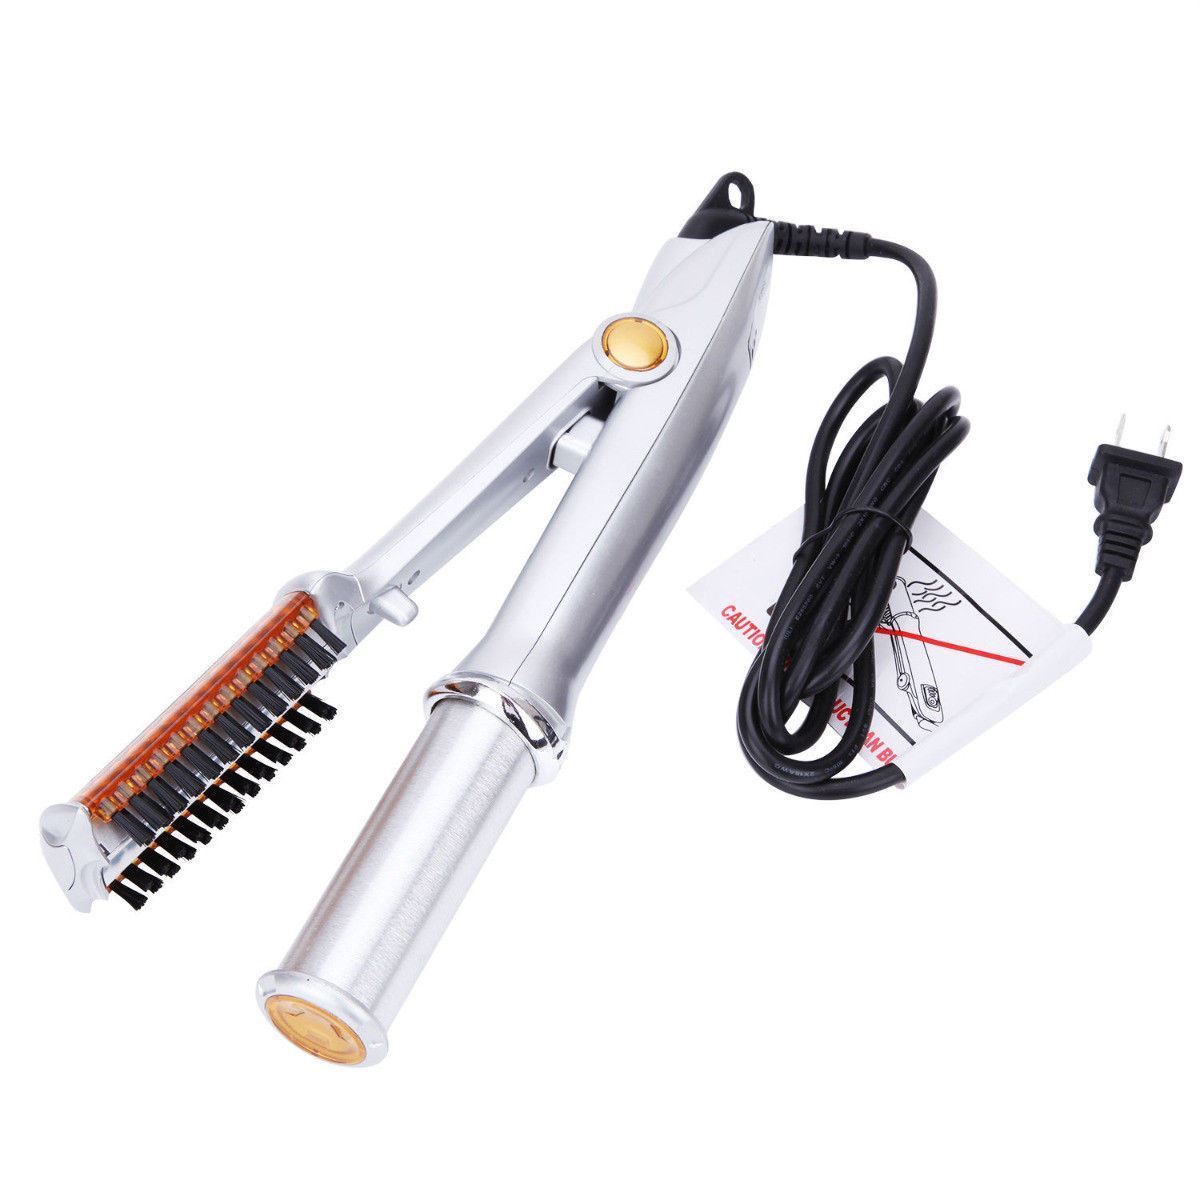 2-Way Hair Straightening And Curling Iron